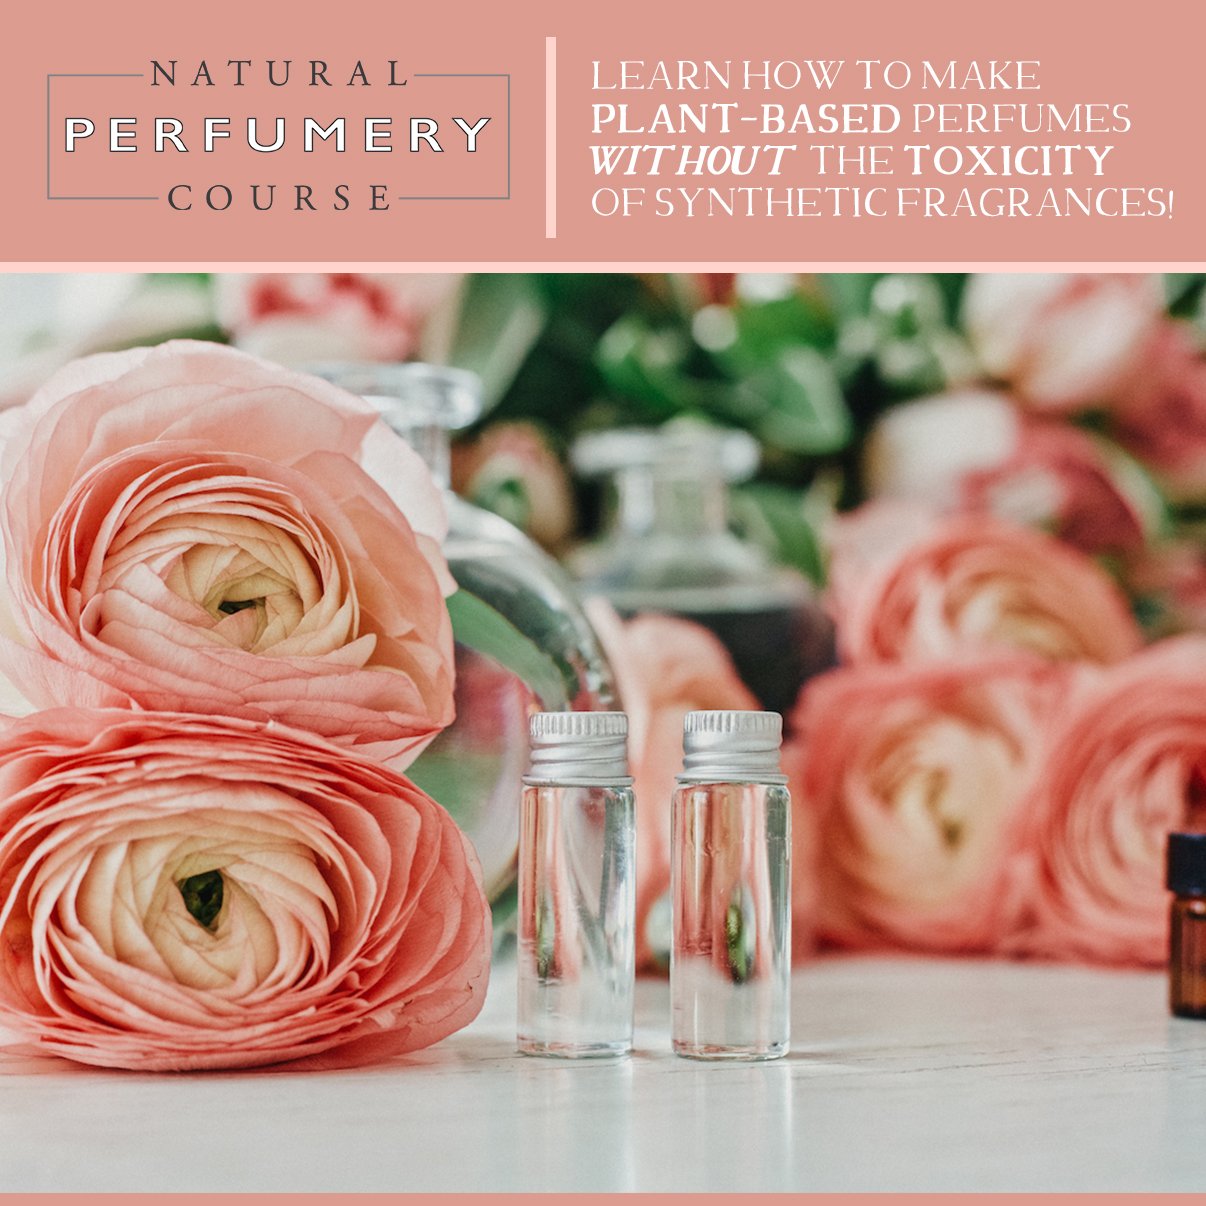 The Natural Perfumery Course will empower you to form a new type of relationship with plants that lets the plants speak for themselves with woodsy whispers, herbaceous harmonies and smoky secrets. 